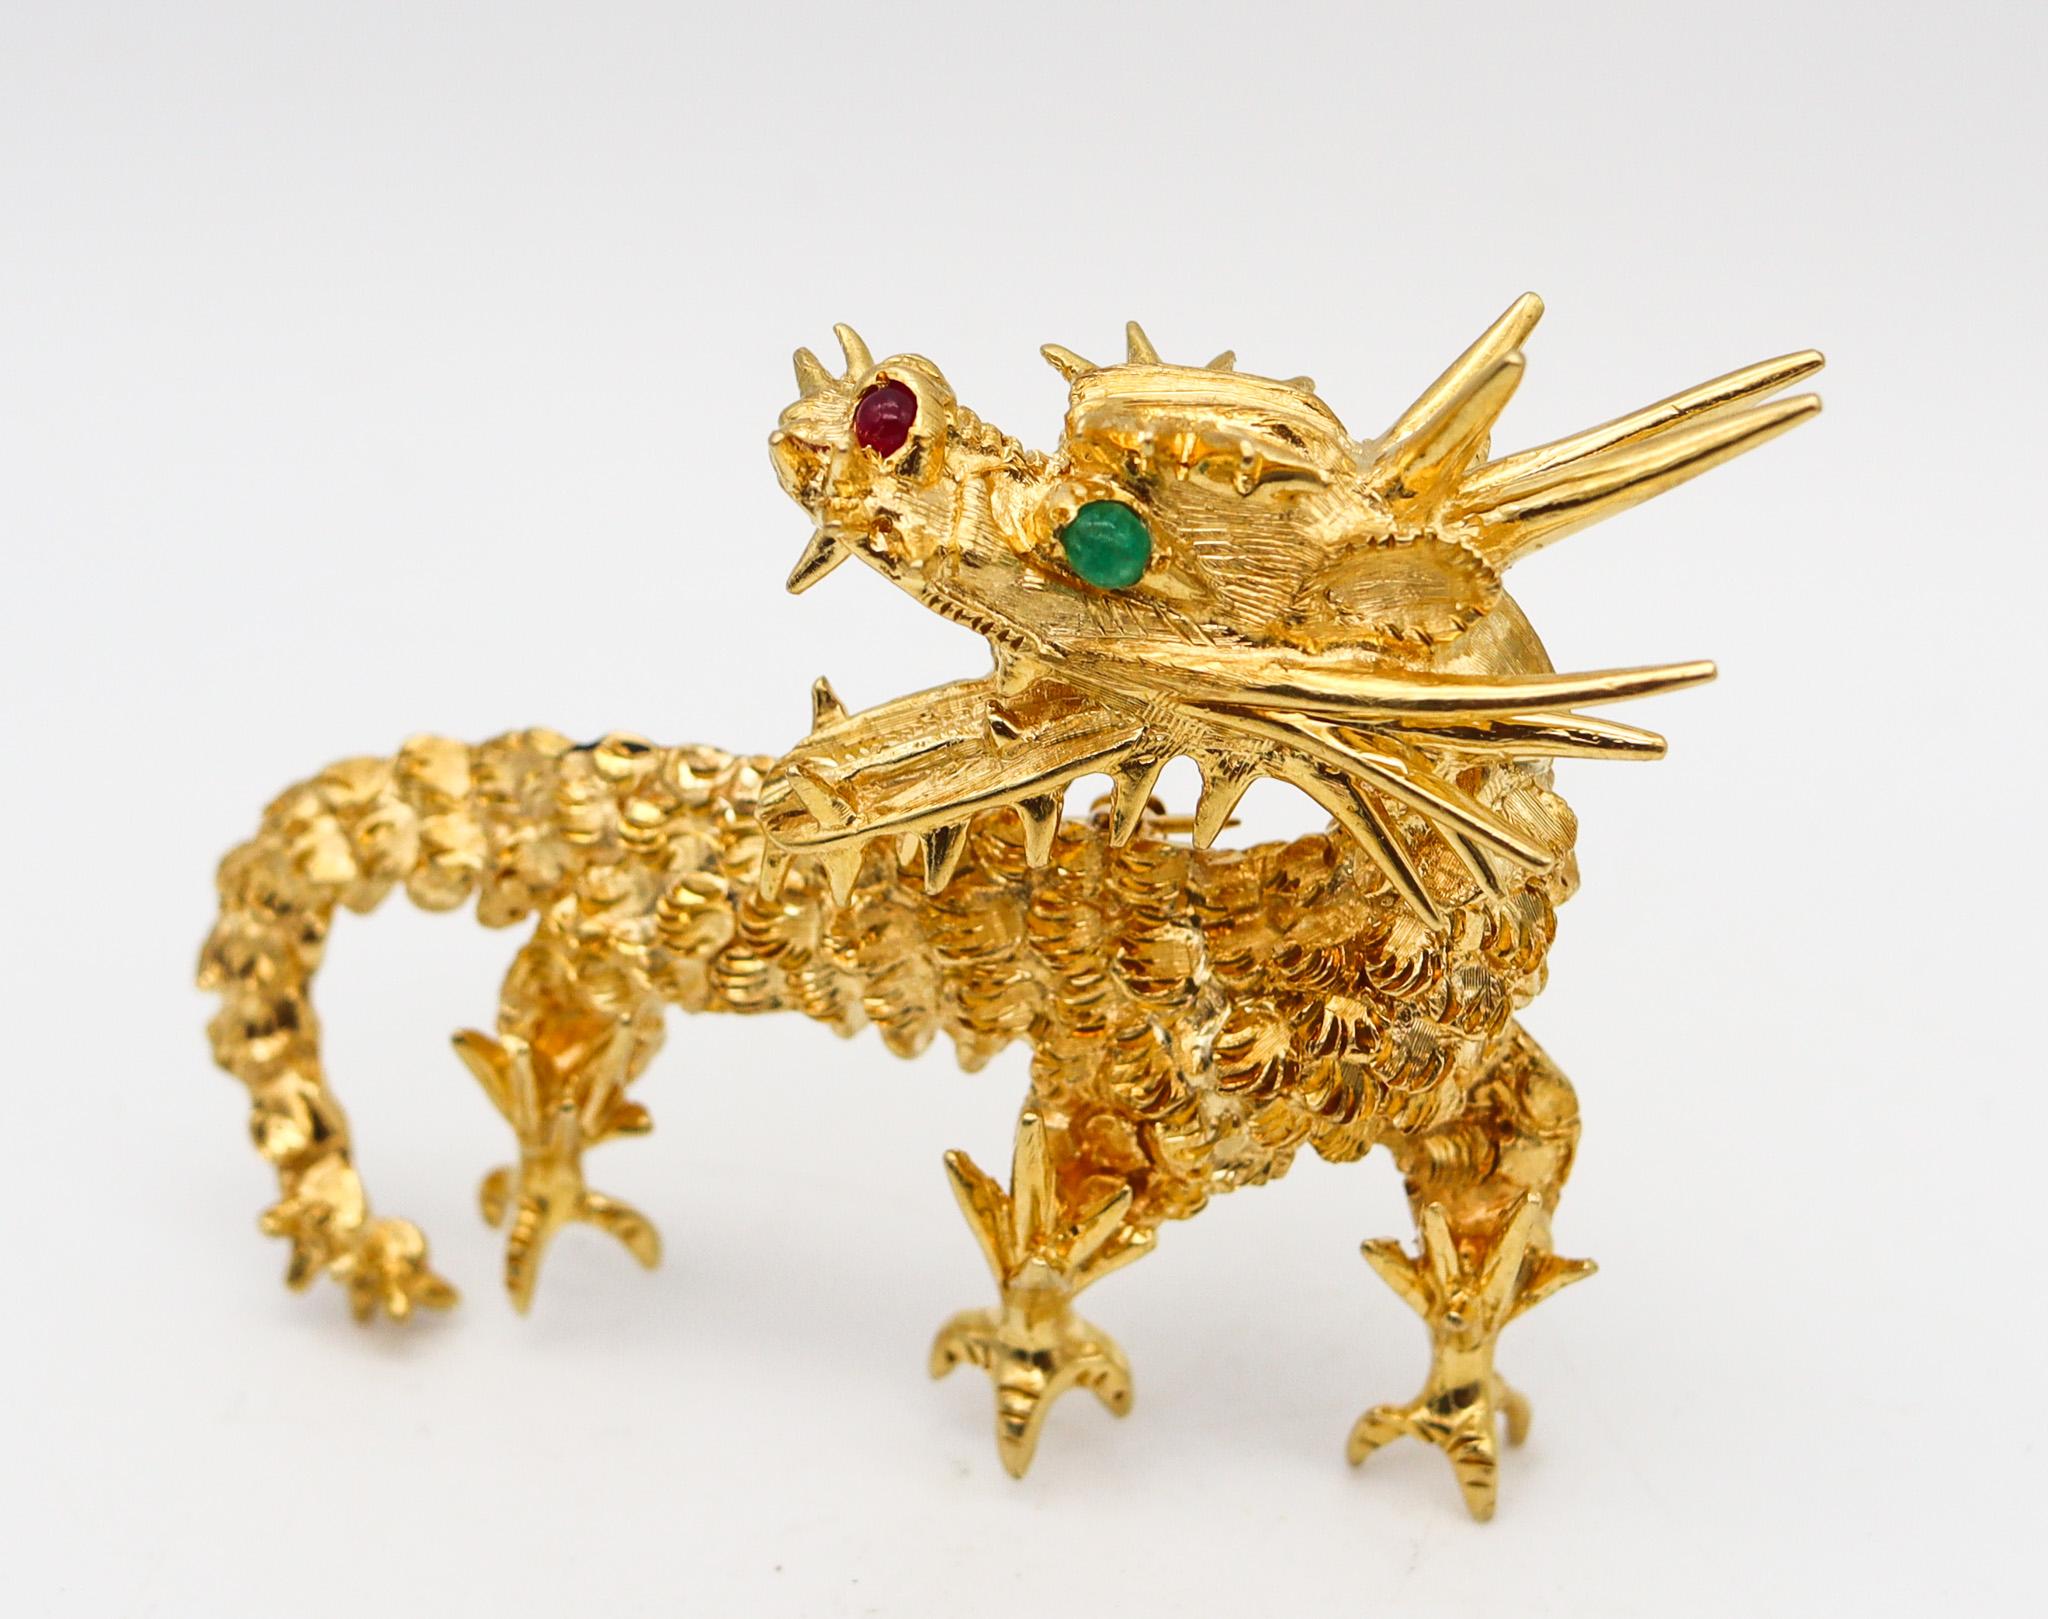 Sculpted dragon brooch designed by Cartier.

This is an exceptional brooch, created by the iconic jewelry house of Cartier, back in the 1970. This brooch was carefully sculpted in three dimensions in the shape of a mythical dragon. Has been crafted